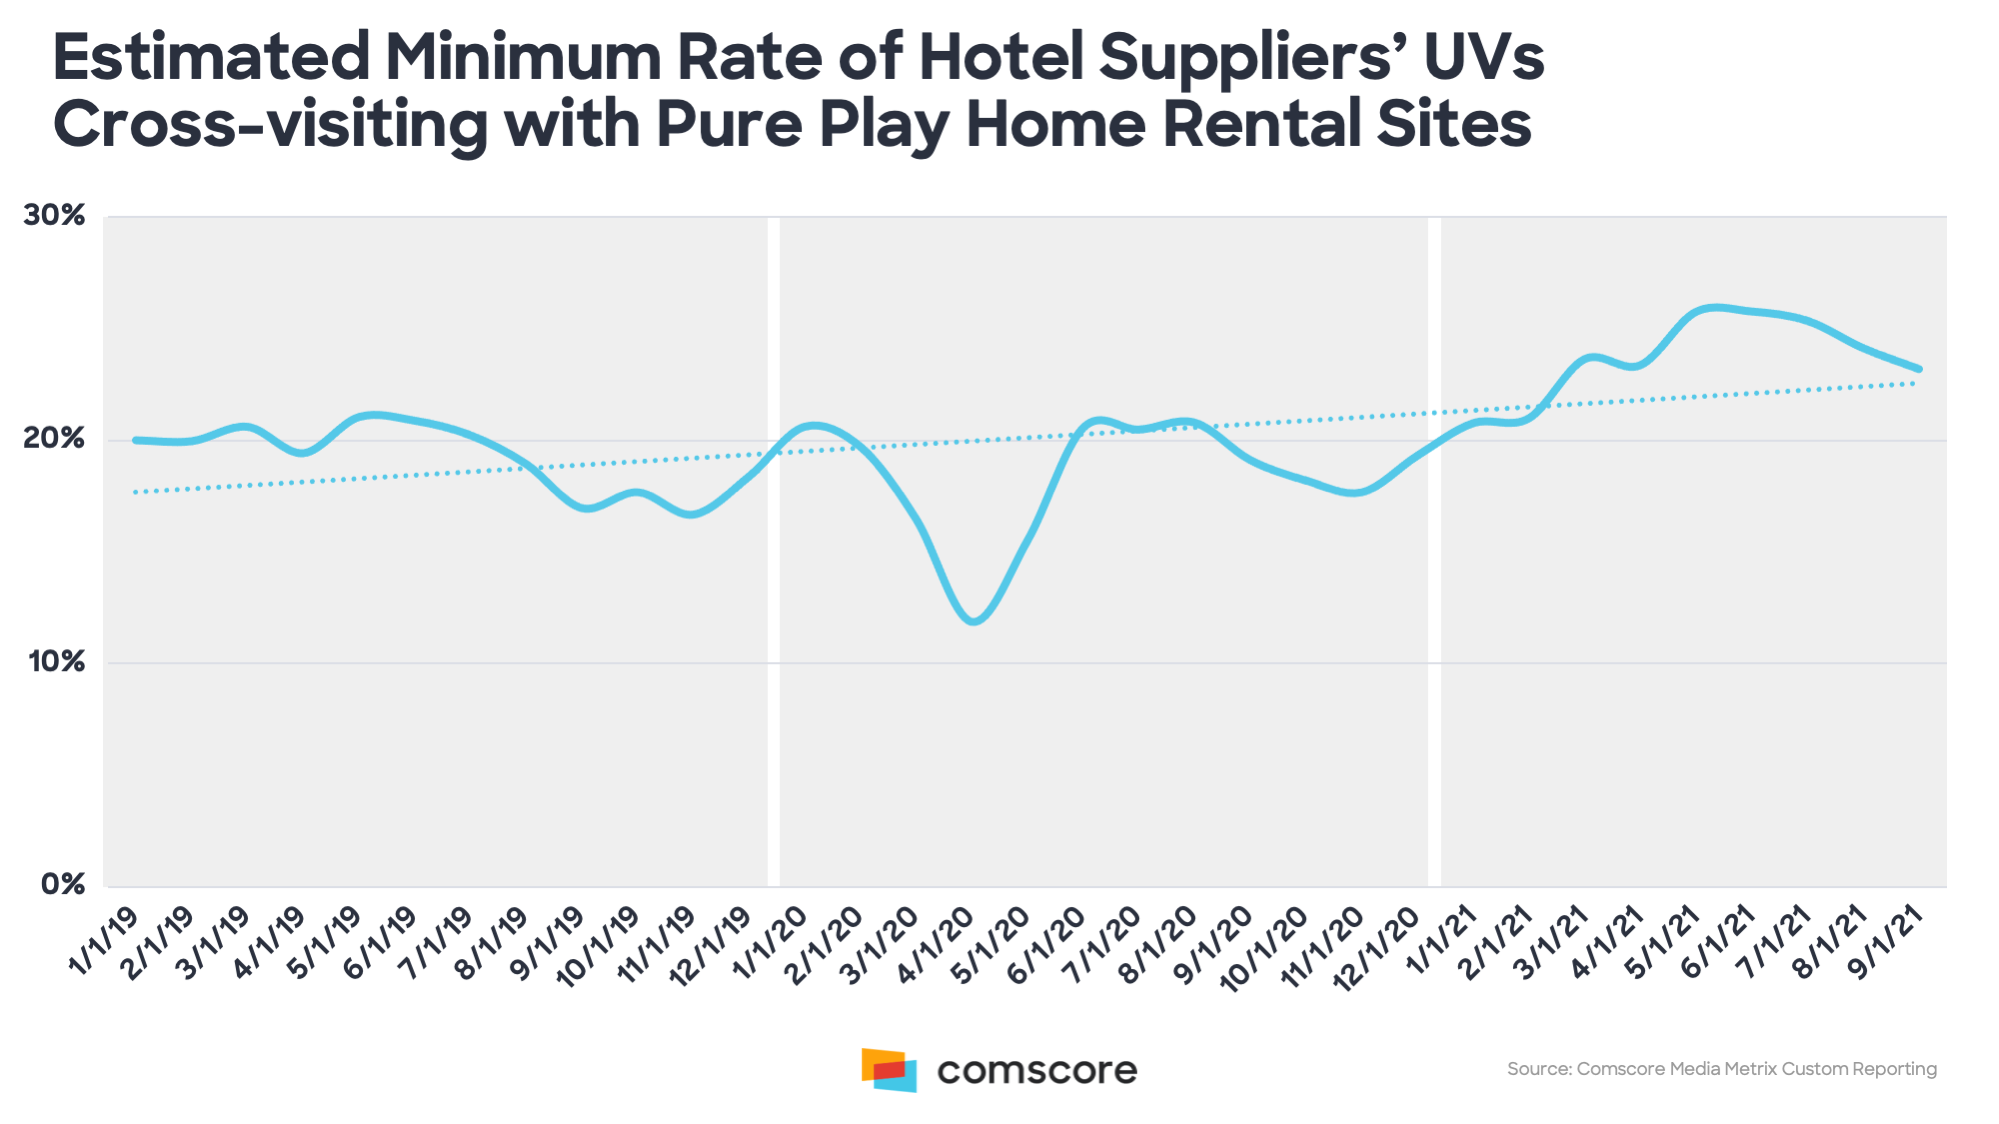 Estimated Minimum Rate of Hotel Suppliers UVs Cross-visiting with Pure Play Home Rental Sites